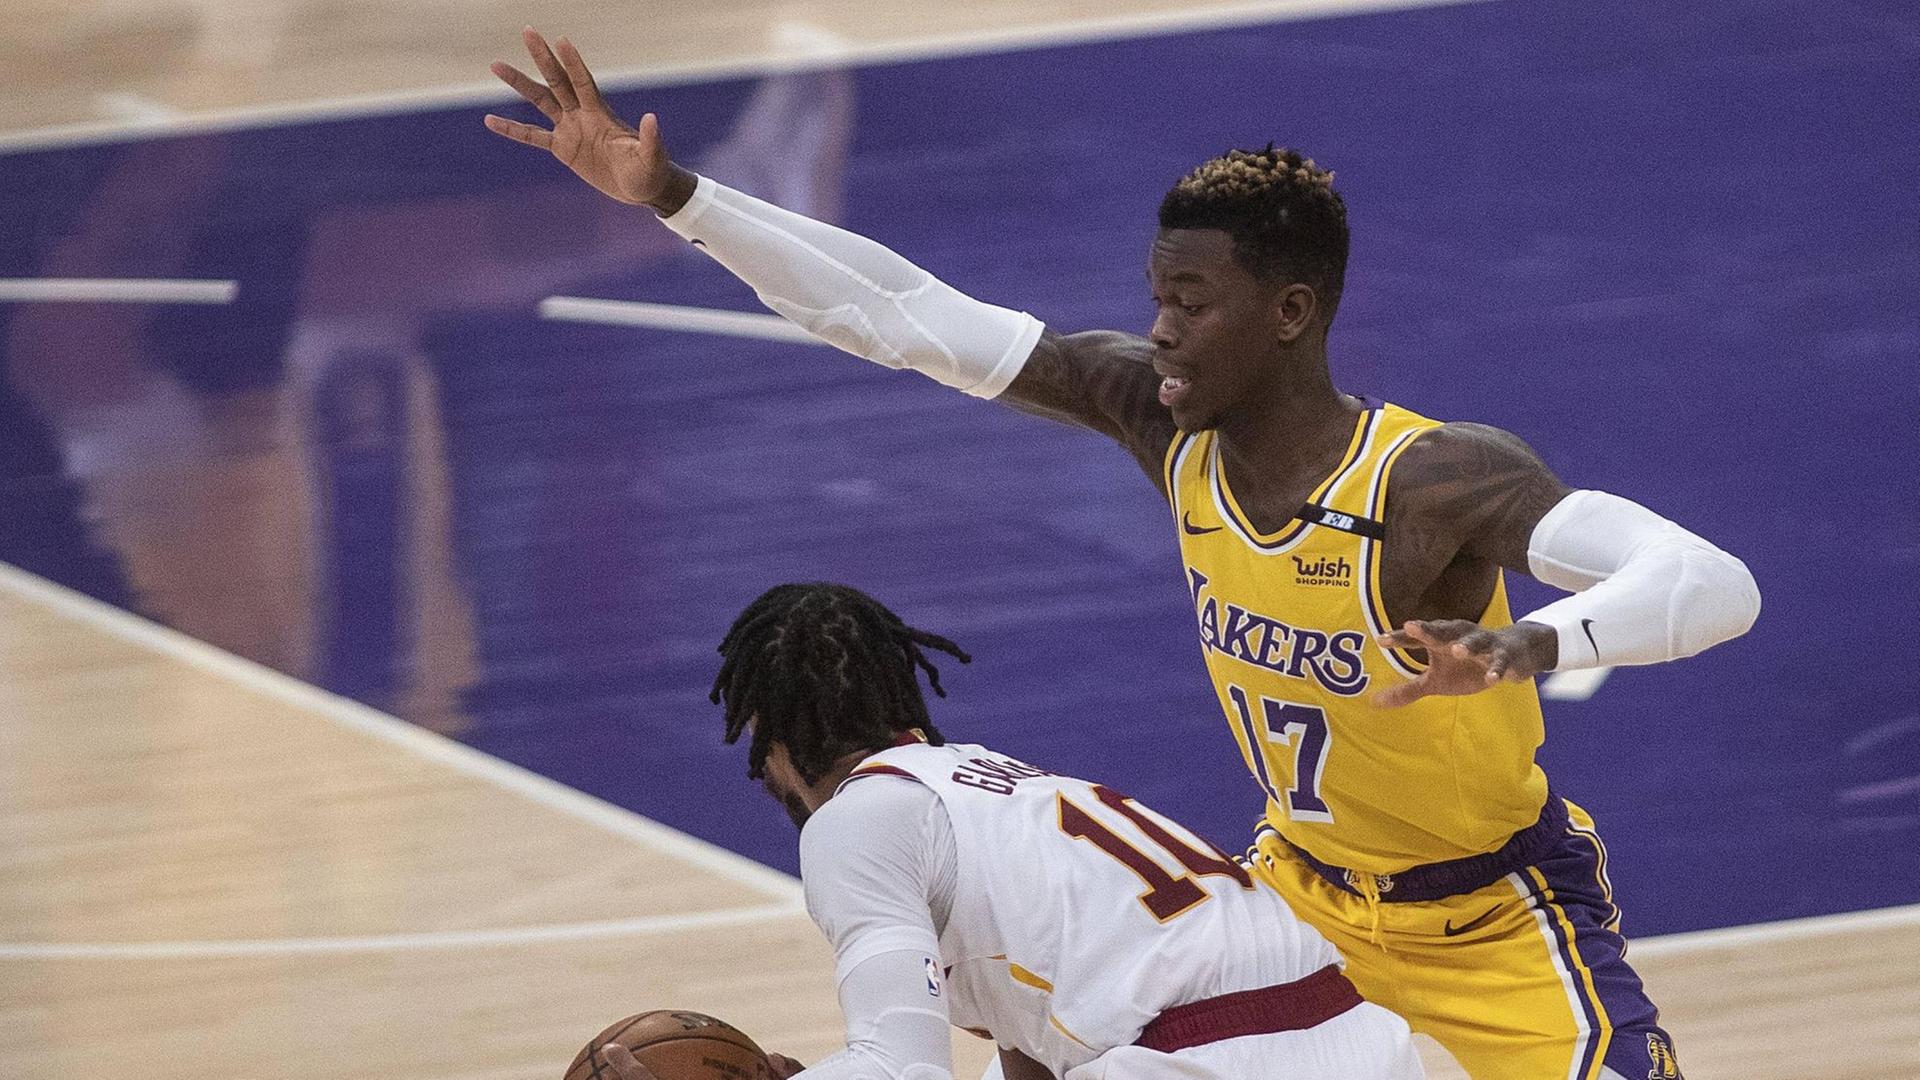 March 26, 2021, Los Angeles, California, USA: Dennis Schroder 17 of the Los Angeles Lakers defends against Darius Garland 10 of the Cleveland Cavaliers during their regular season NBA, Basketball Herren, USA game on Friday March 26, 2021 at the Staples Center in Los Angeles, California. Lakers defeat Cavaliers, 100-86. /PI Los Angeles USA - ZUMAp124 20210326_zaa_p124_009 Copyright: xJAVIERxROJASx